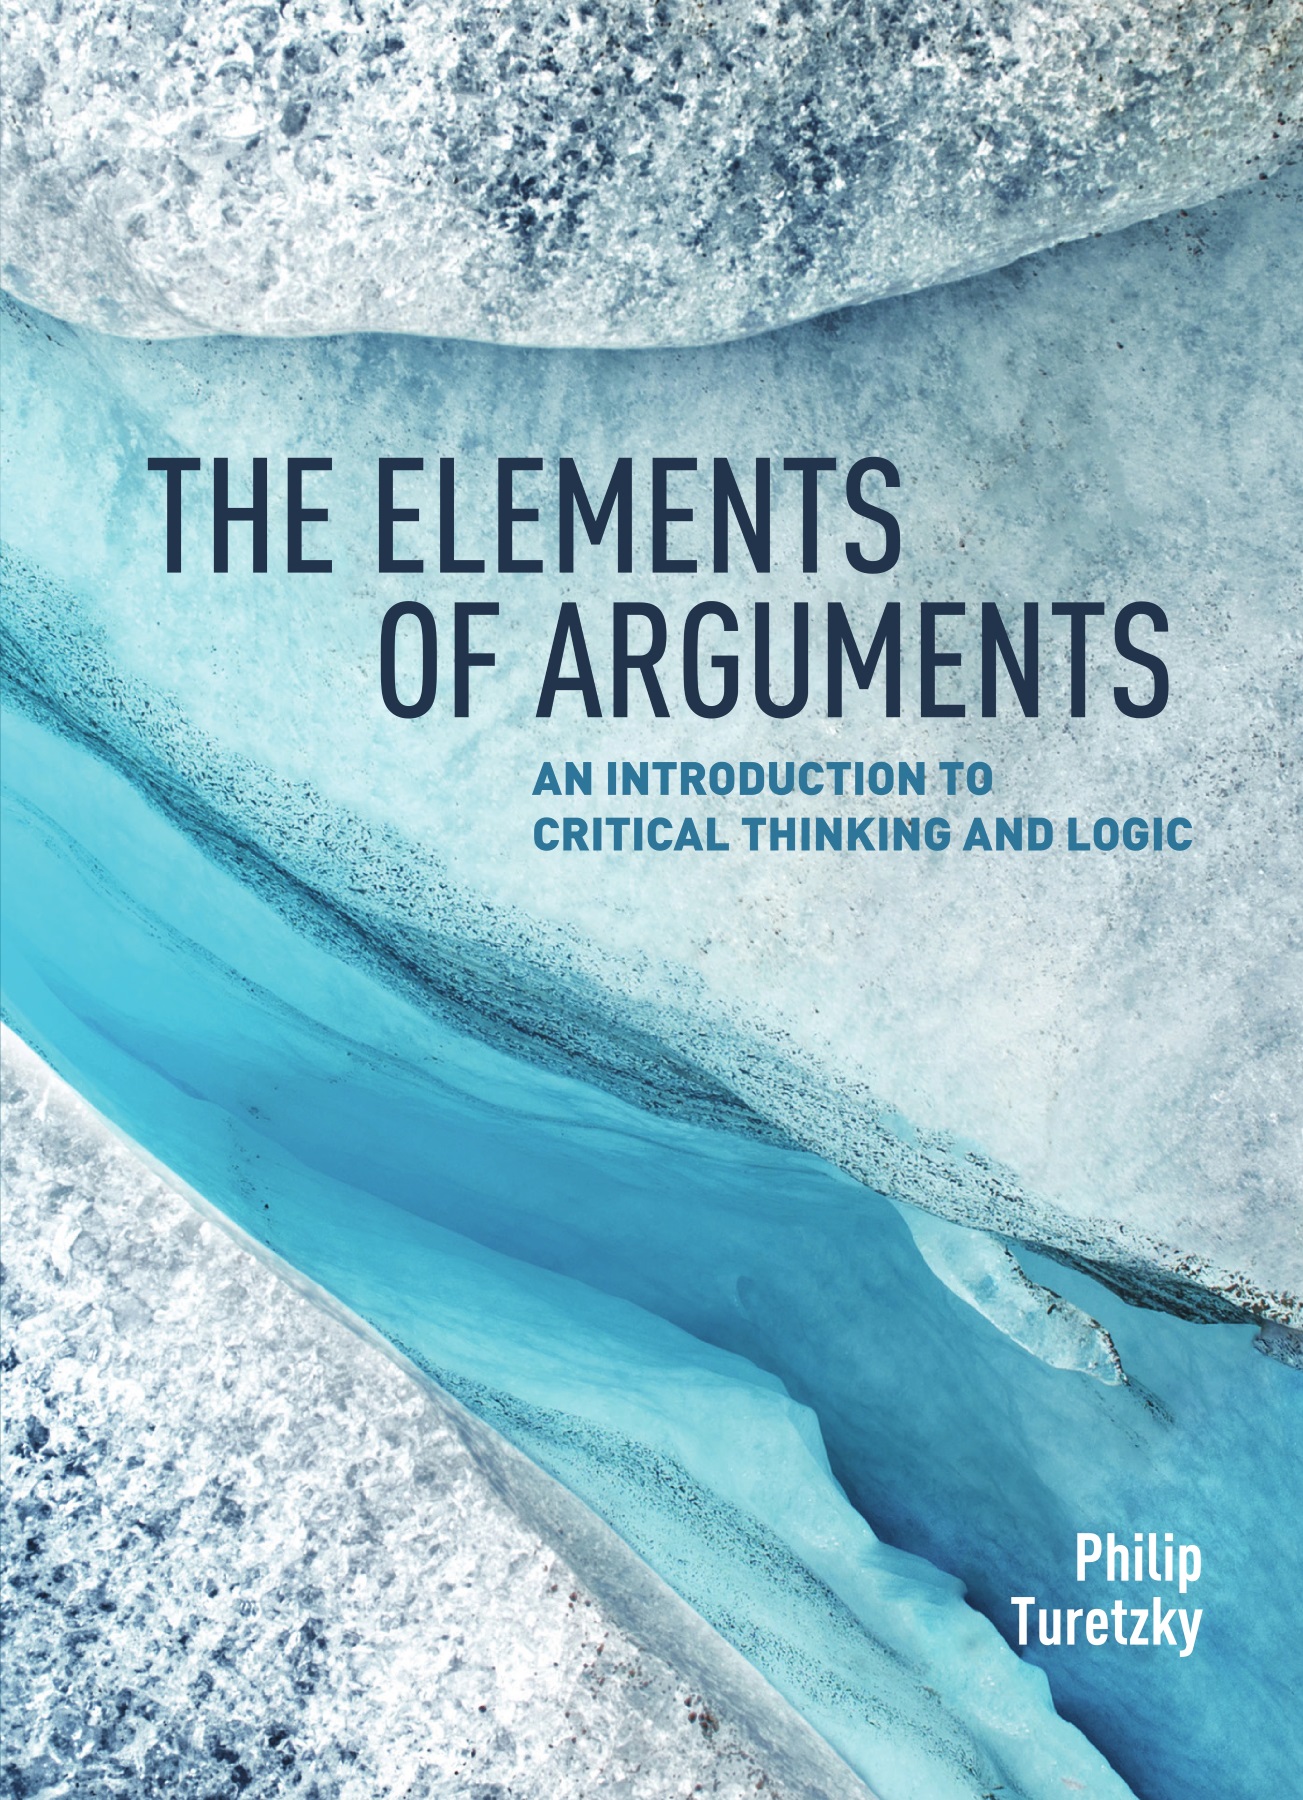 importance of arguments in critical thinking